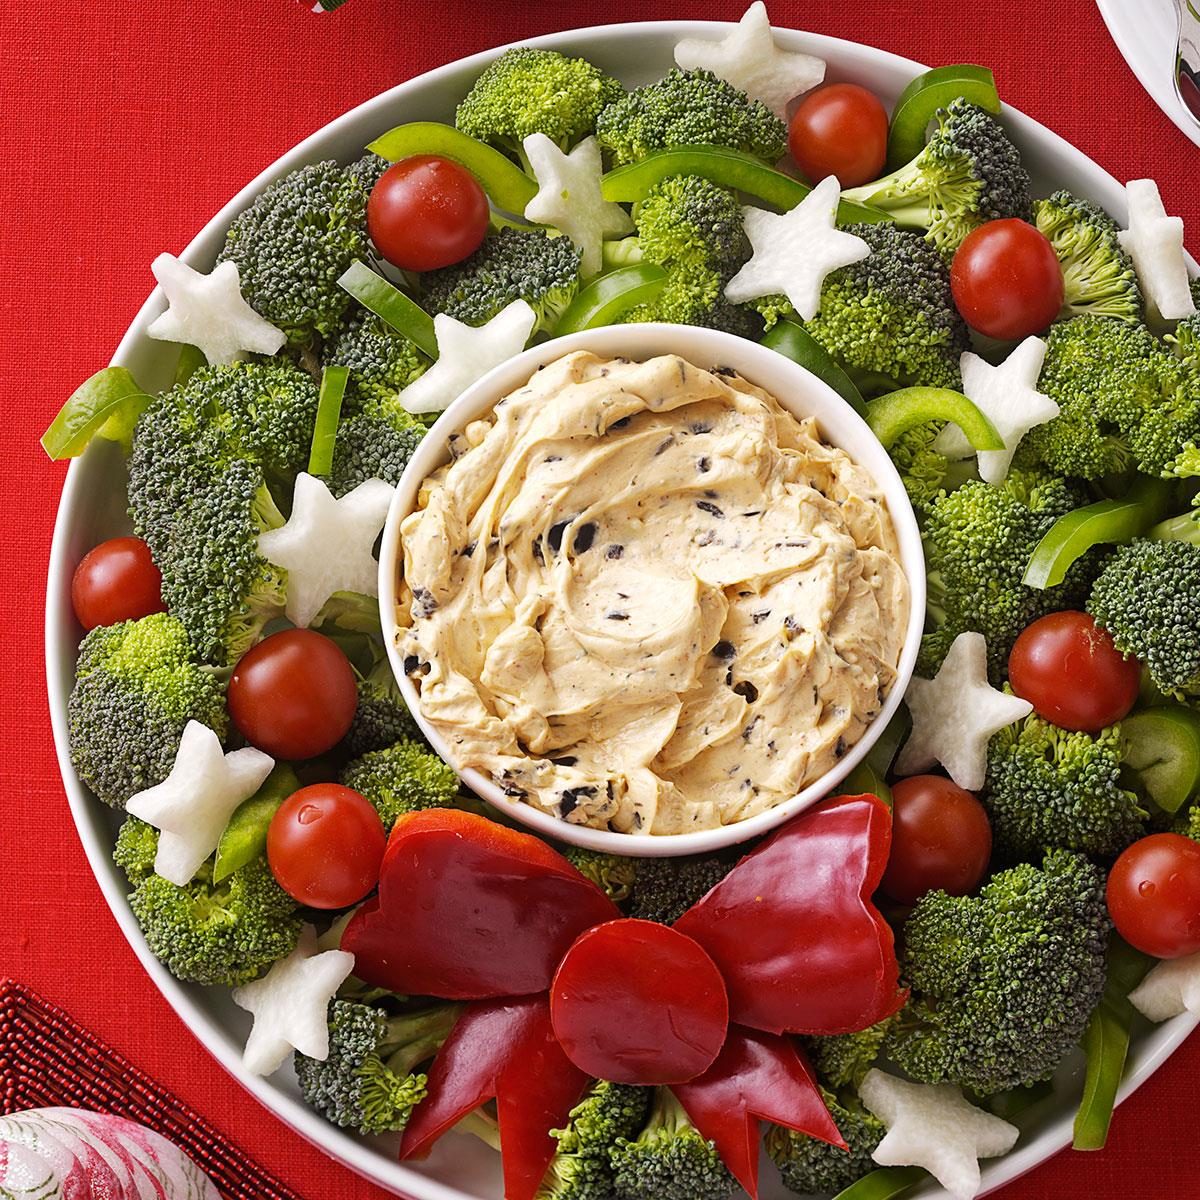 Vegetable Wreath with Dip Recipe: How to Make It | Taste of Home